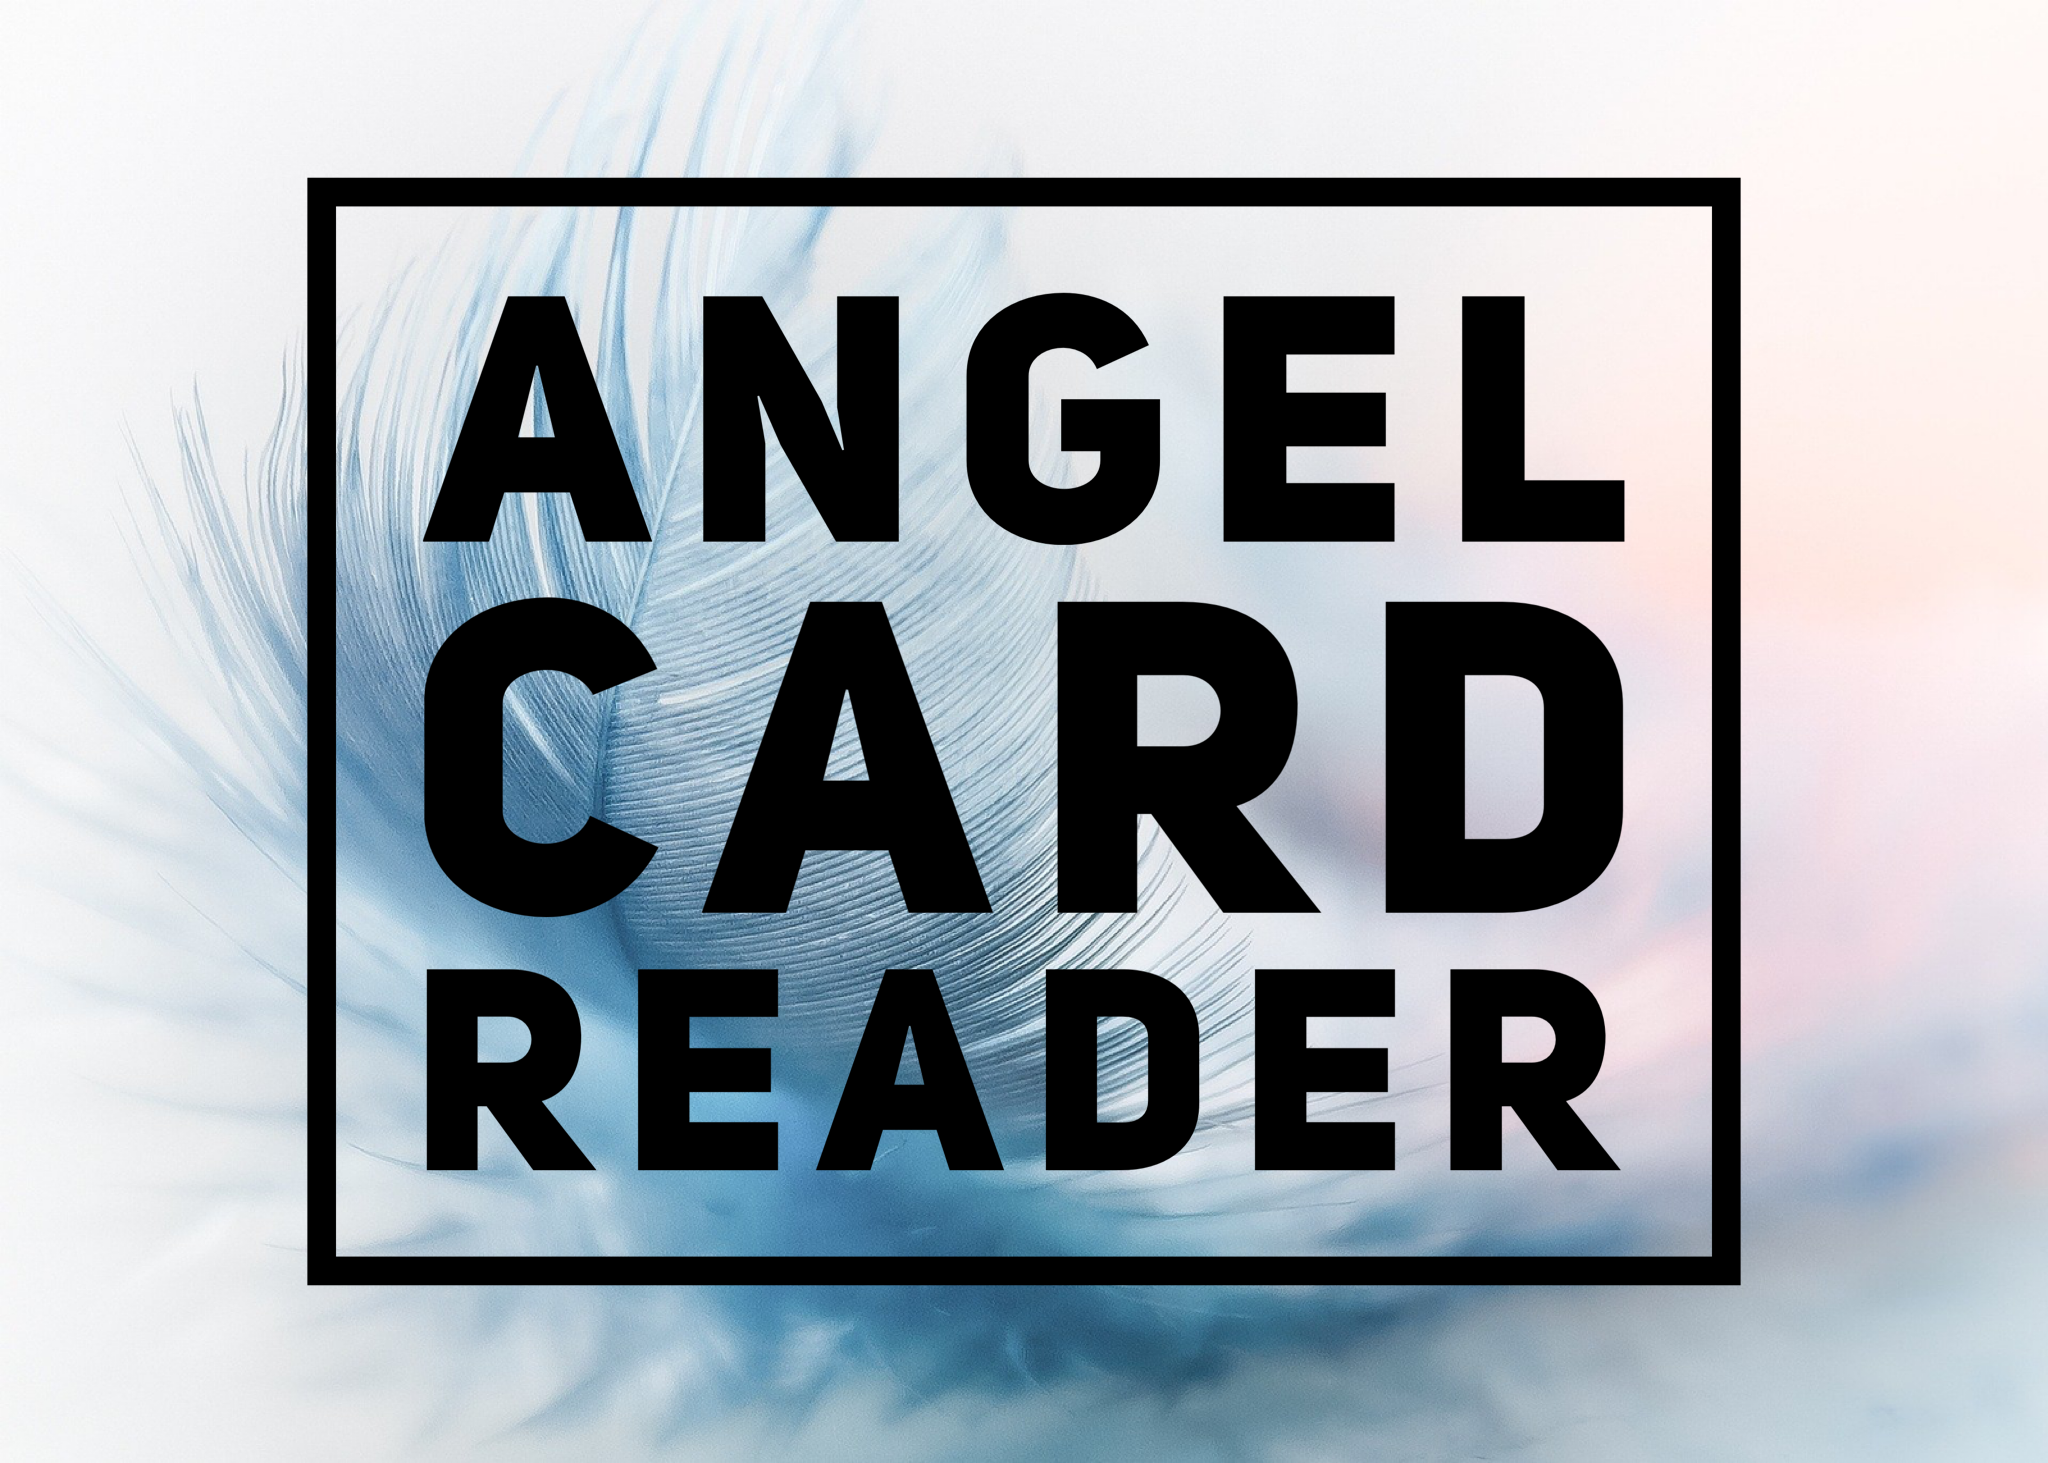 A picture of the angel card reader logo.